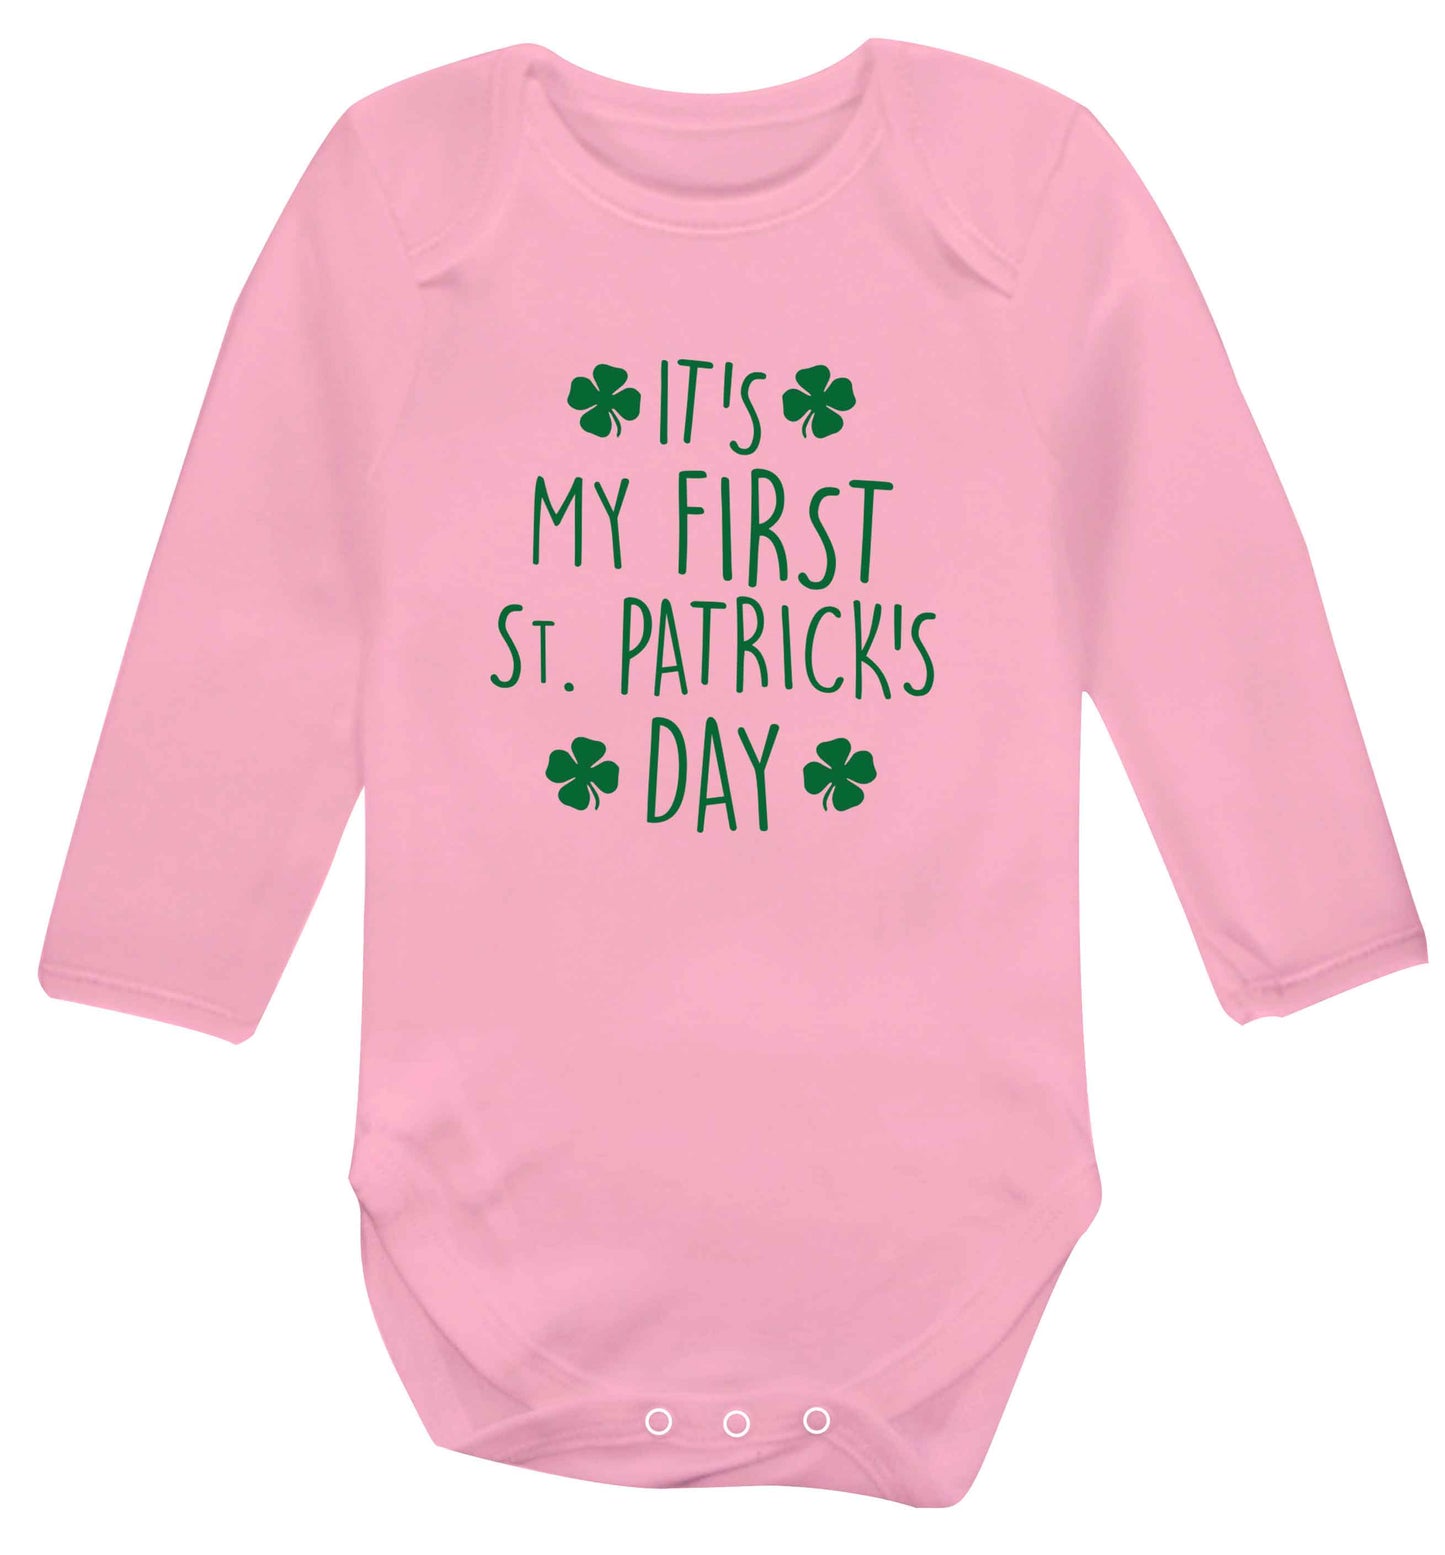 It's my first St.Patrick's day baby vest long sleeved pale pink 6-12 months